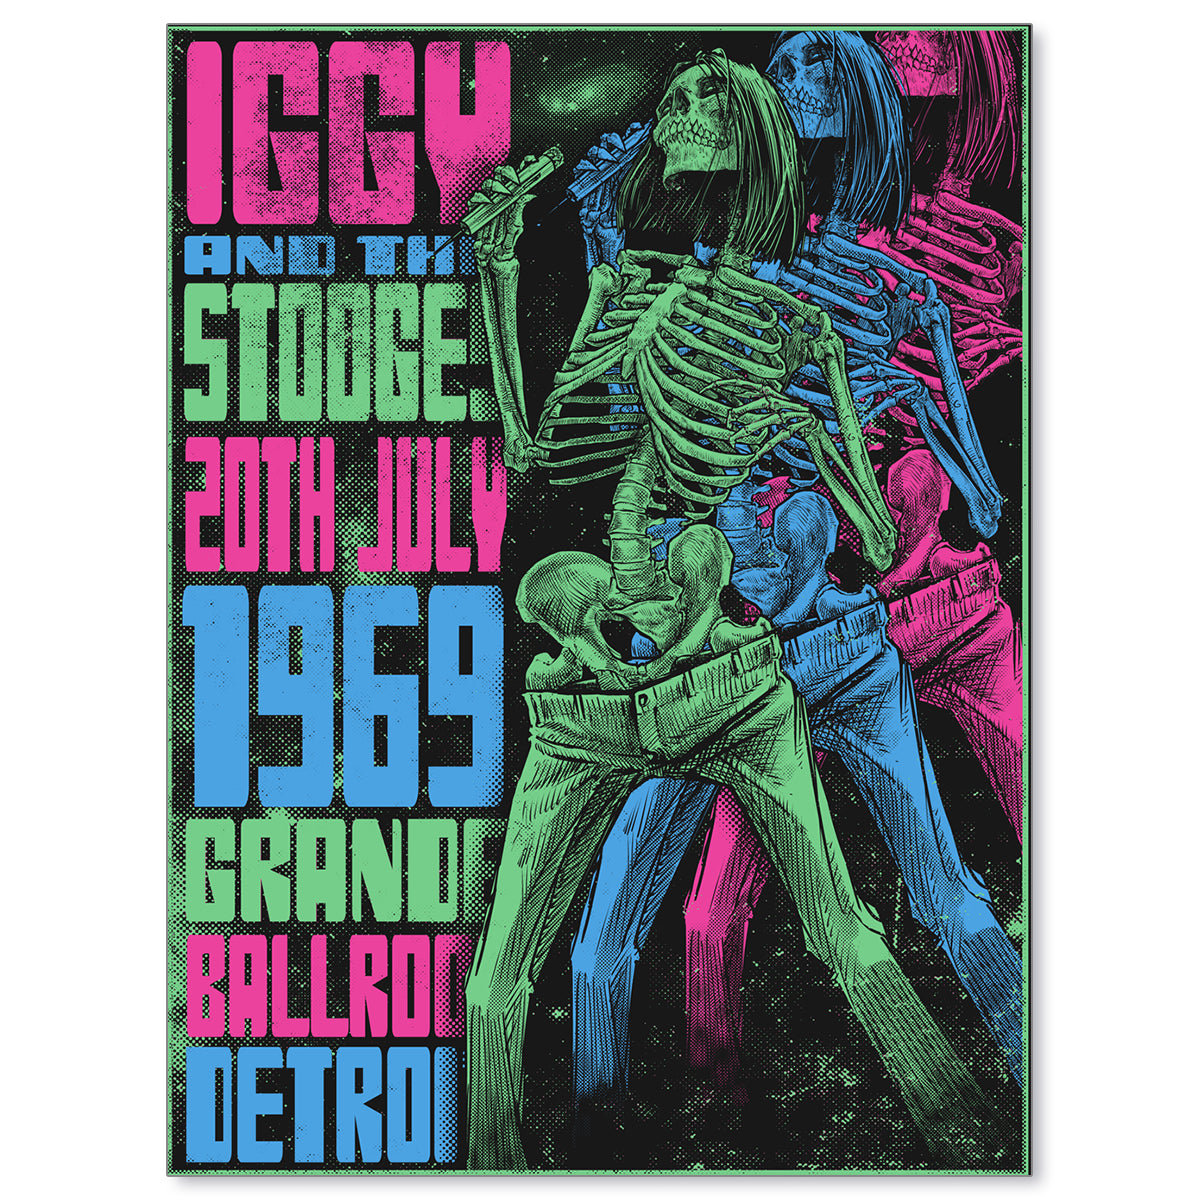 Iggy and The Stooges Detroit 1969 (Moonbeam Glow Edition)